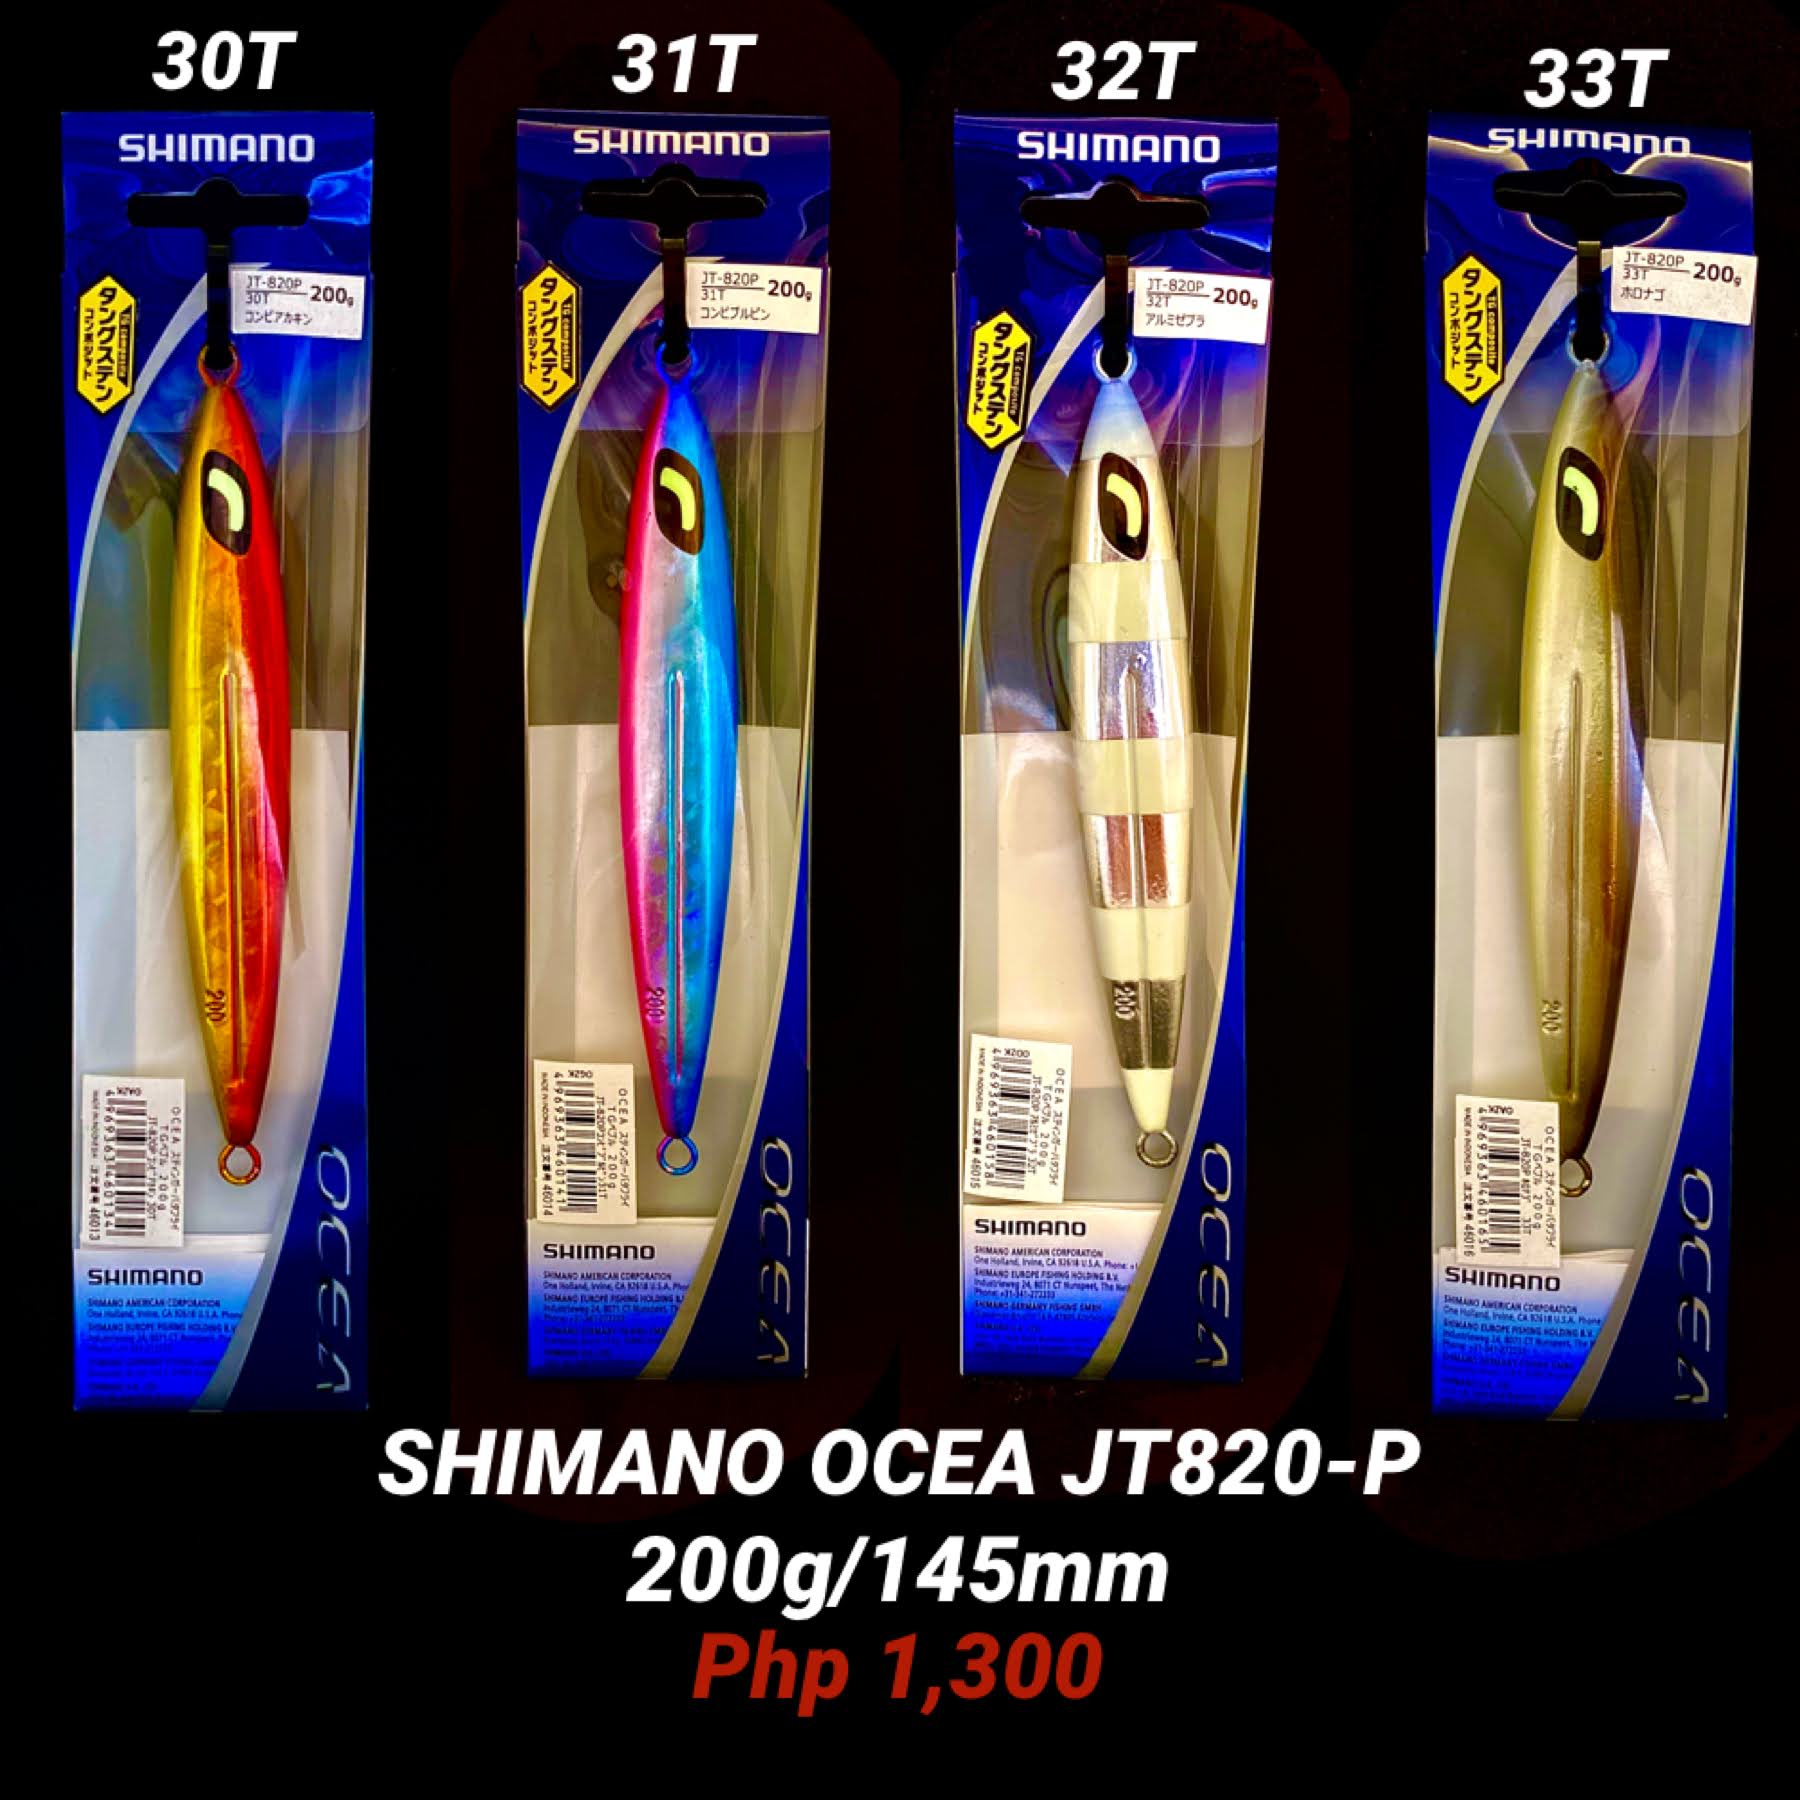 Shimano Ocea JT820-P 200g (To be updated)